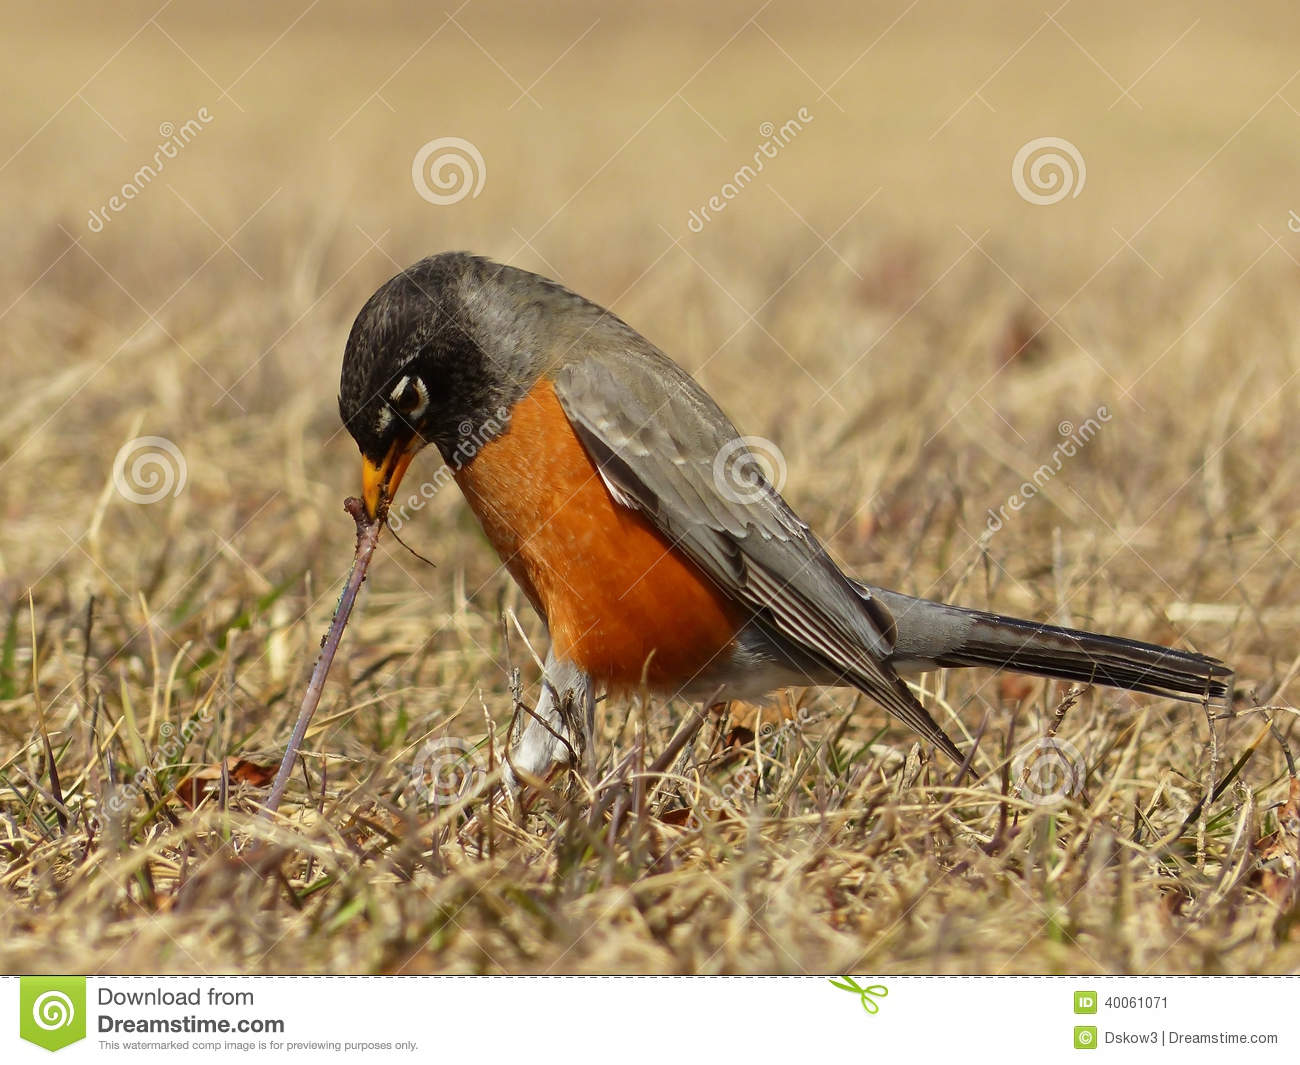     Of An American Robin Pulling A Worm Out Of The Ground In A Field